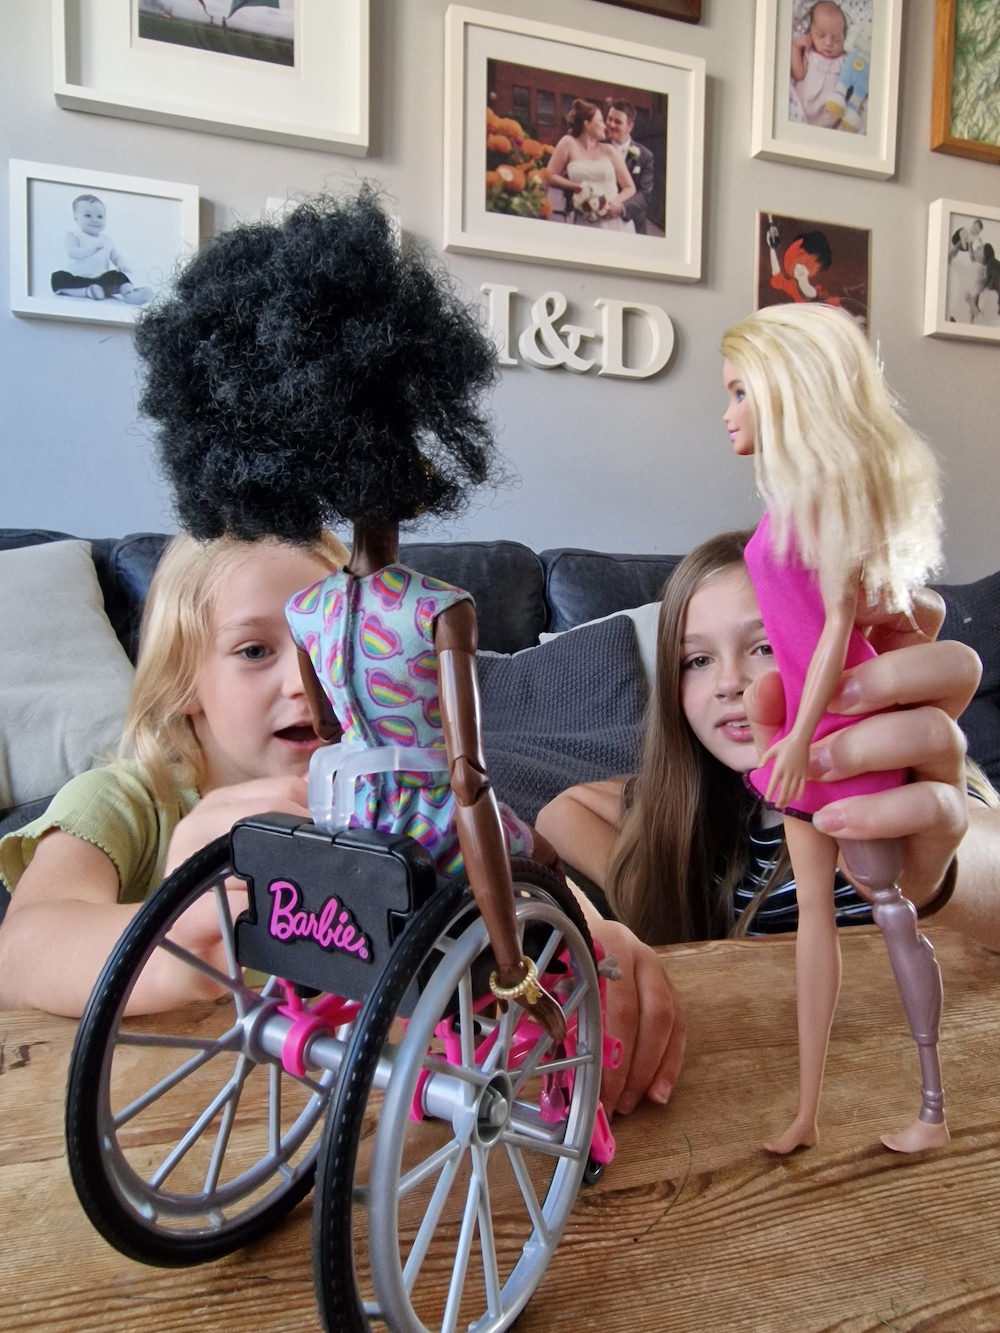 Barbie in a wheelchair and barbie with prosthetic leg